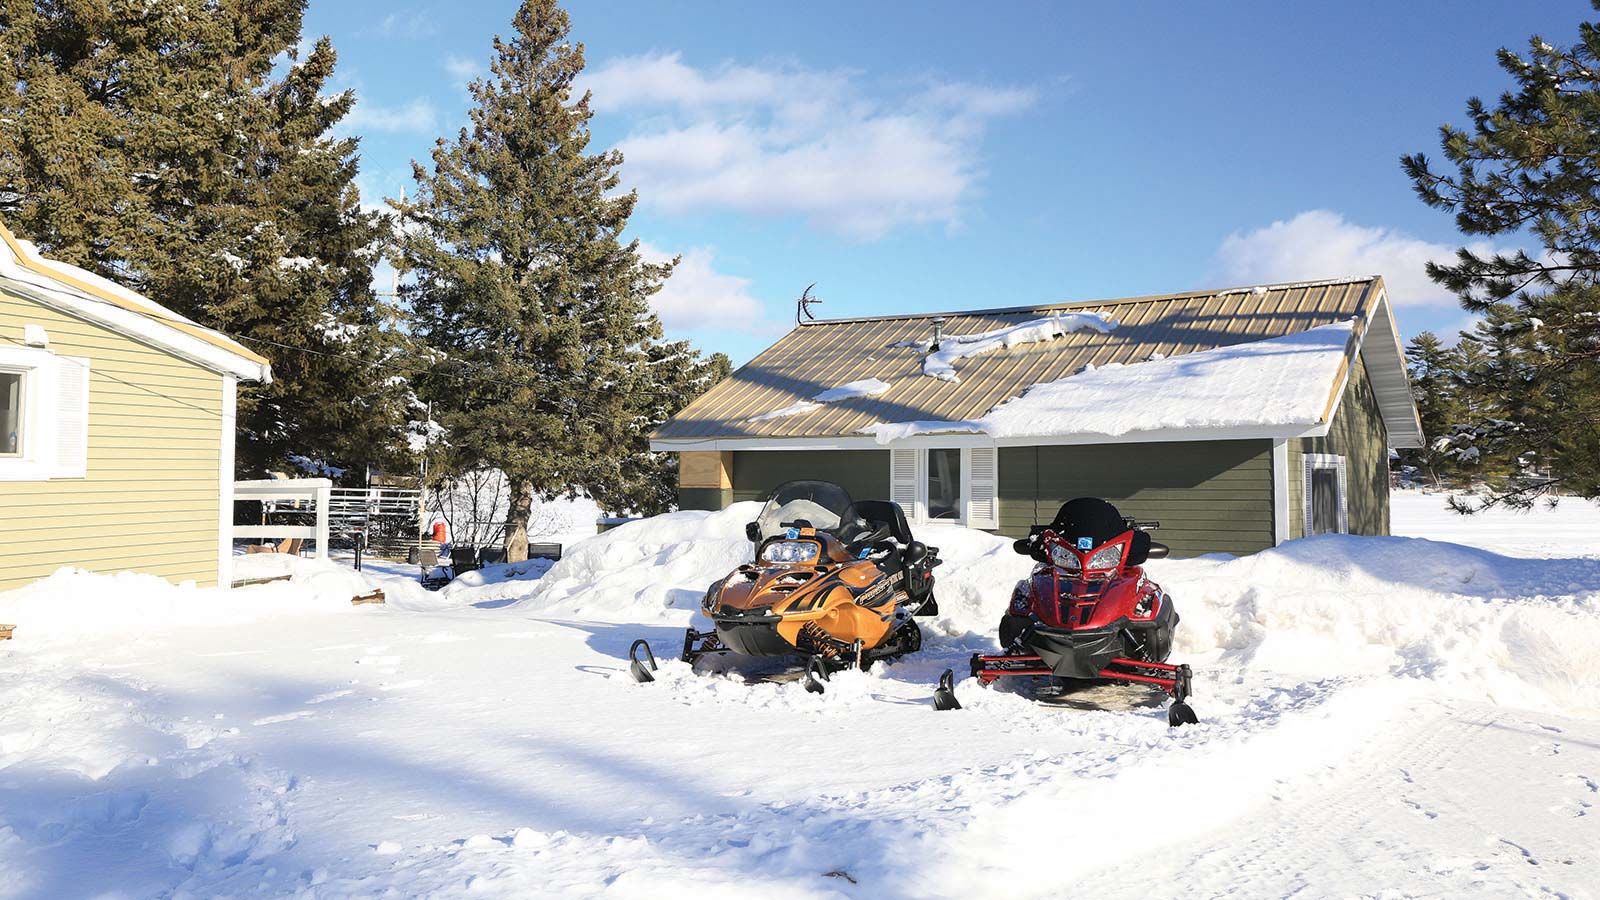 Two snowmobiles parked outside of a resort surrounded by snow